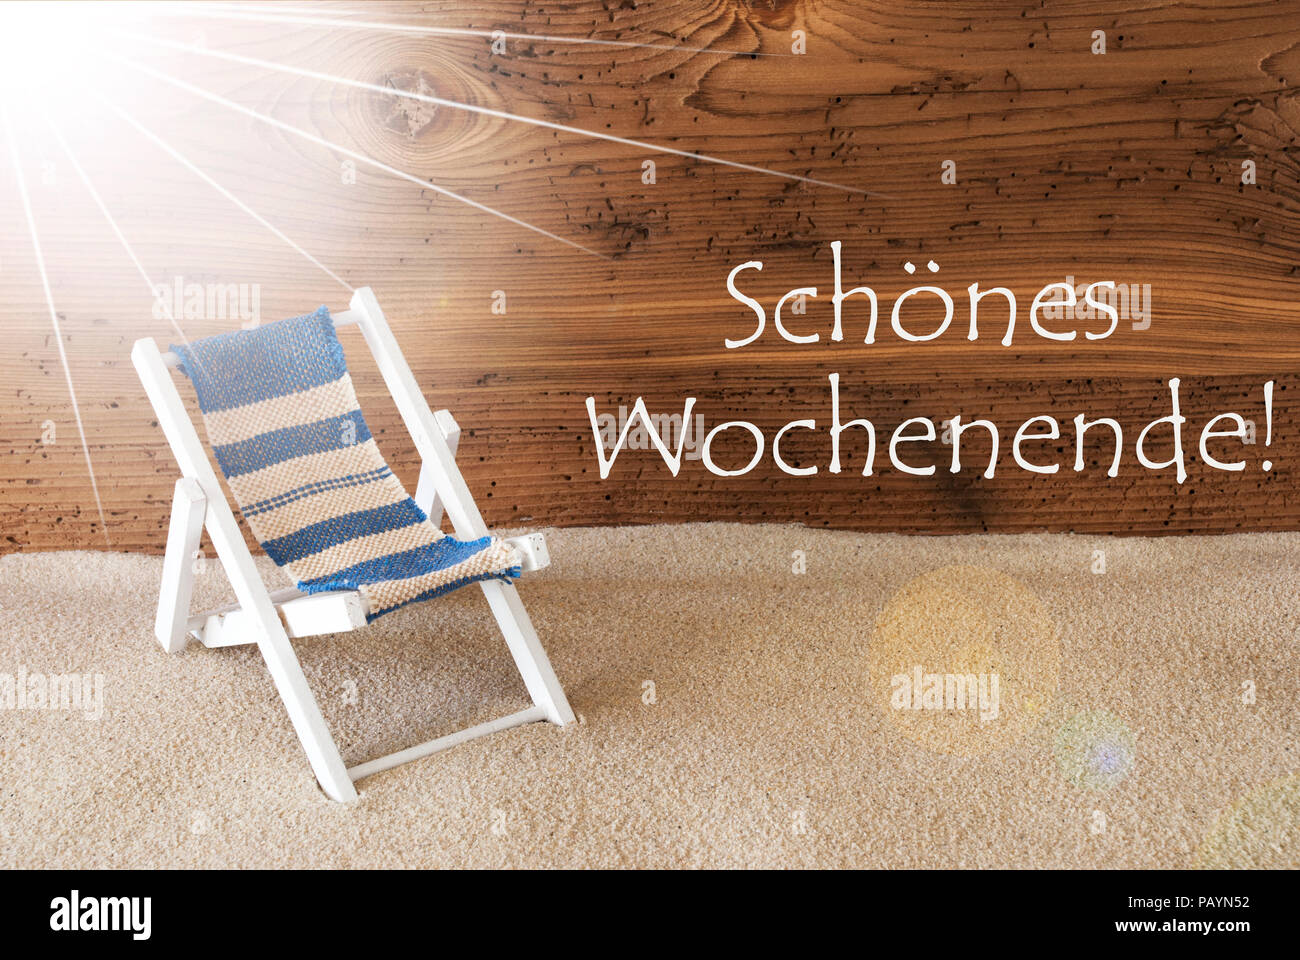 Summer Sunny Greeting Card, Wochenende Means Weekend Stock Photo